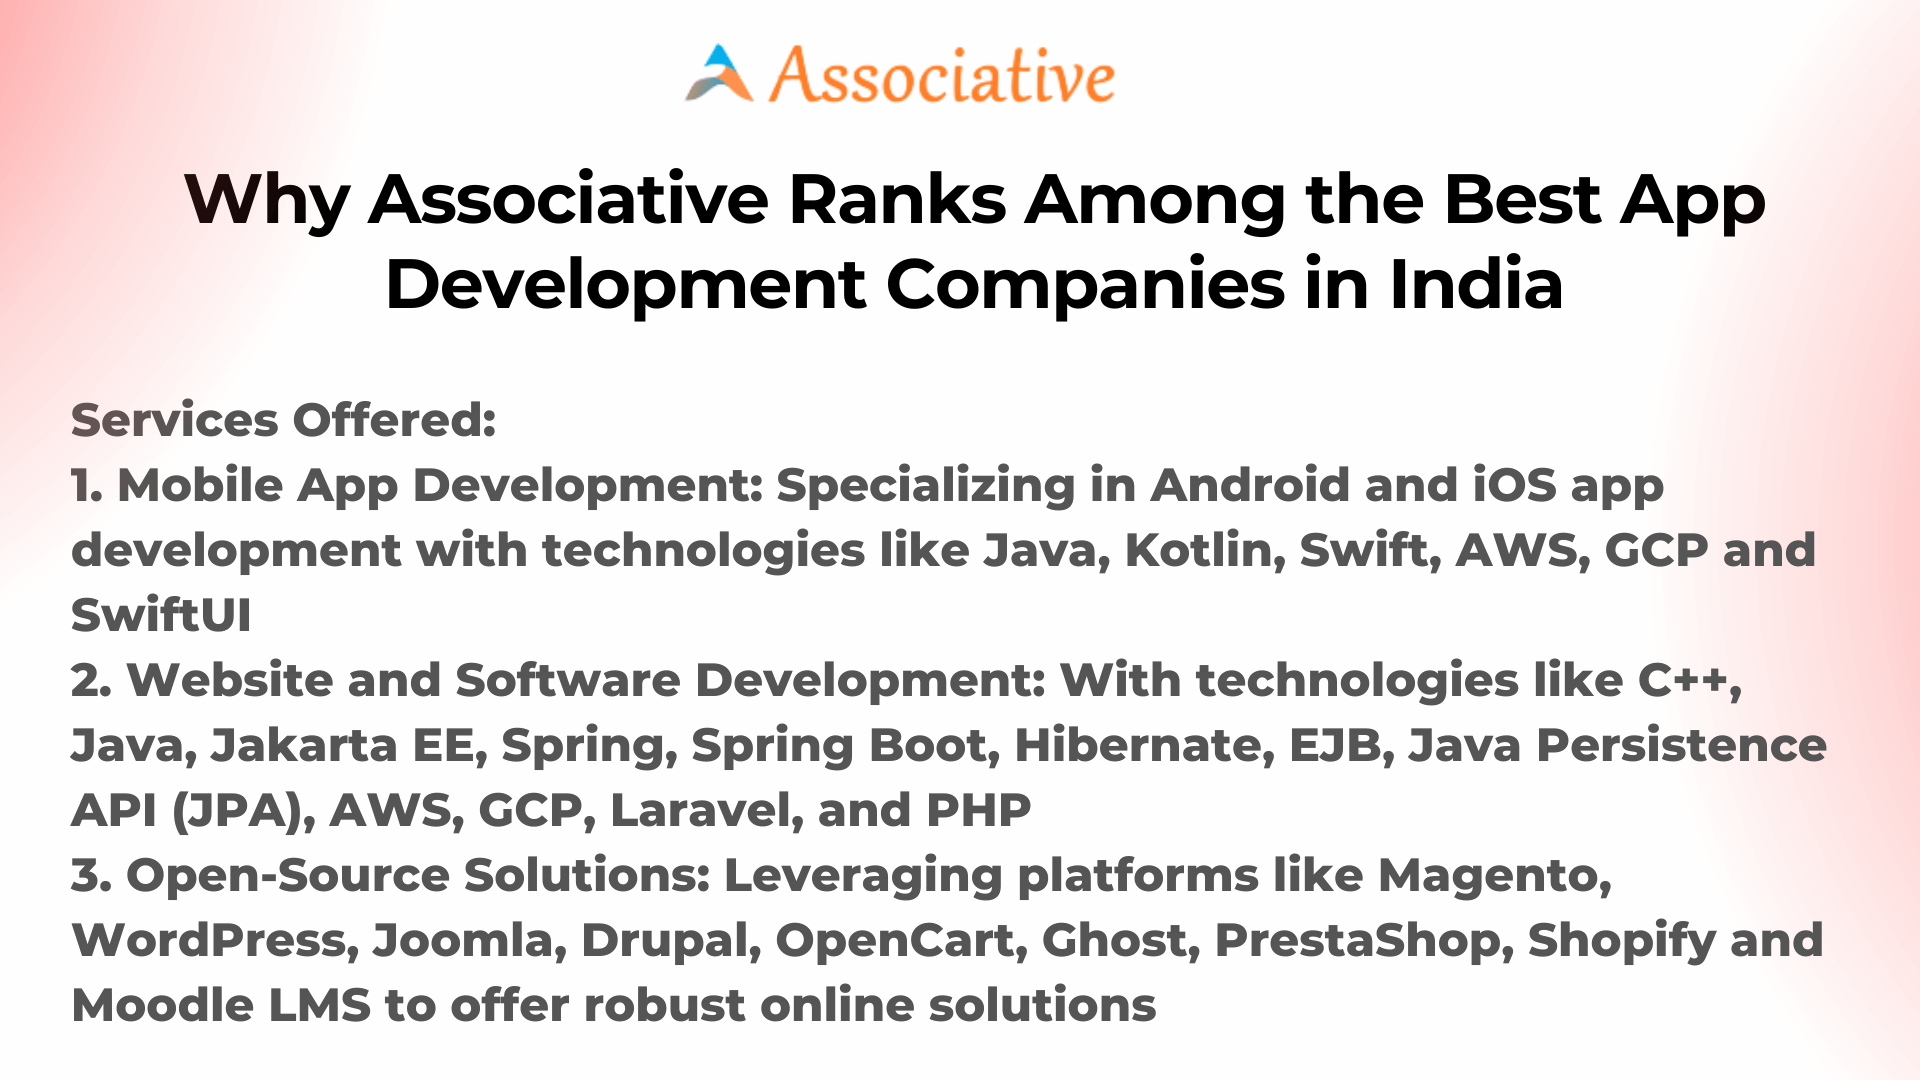 Why Associative Ranks Among the Best App Development Companies in India